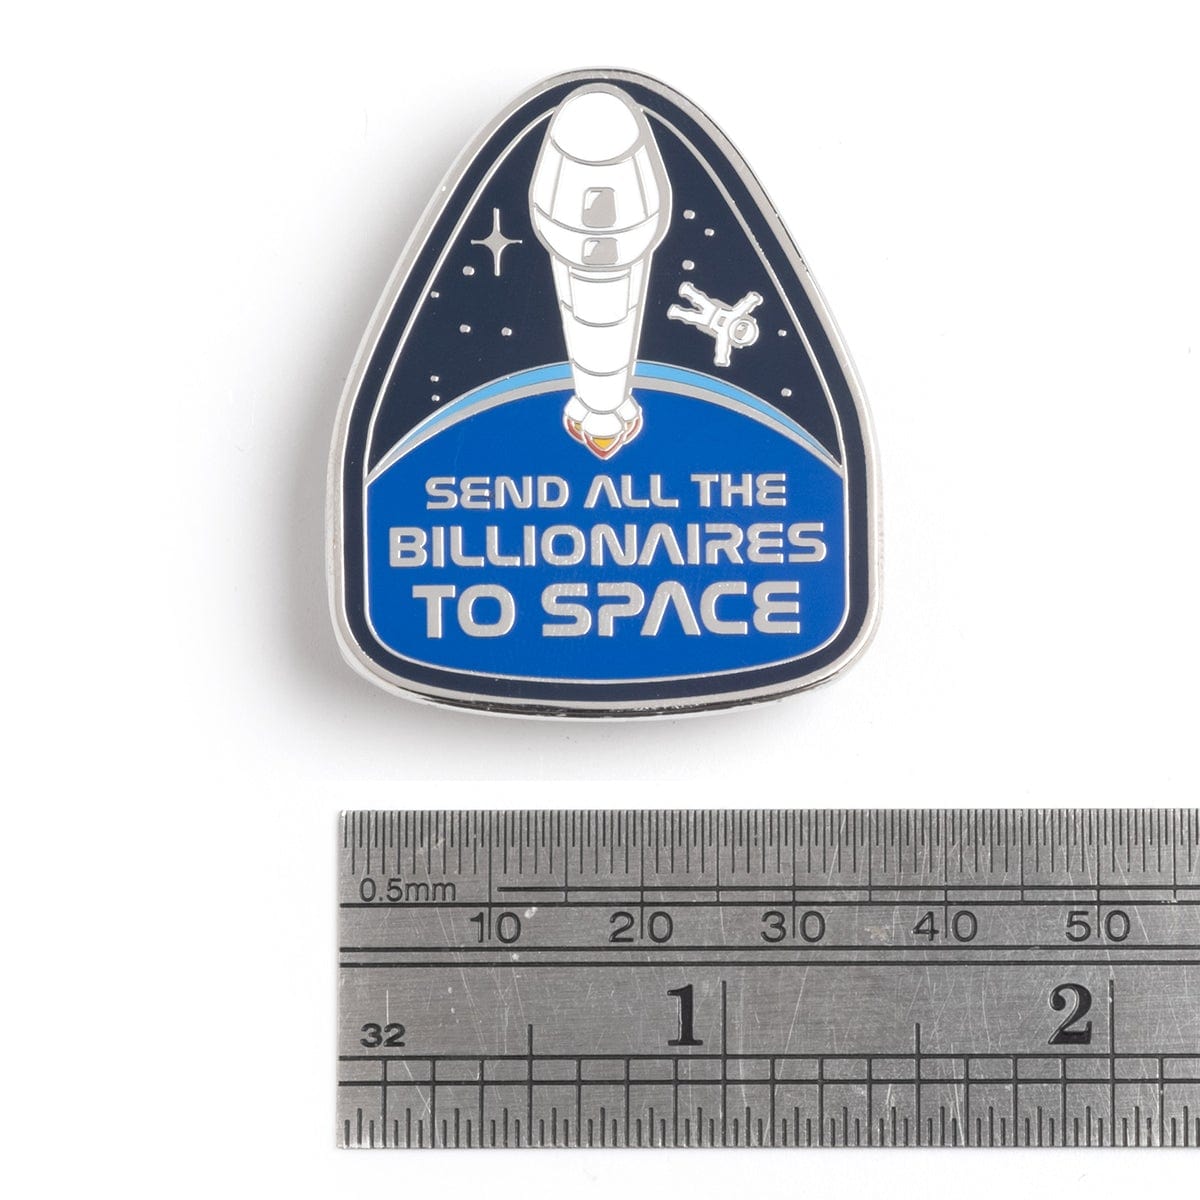 Send All the Billionaires to Space Pin (Rocket Version)